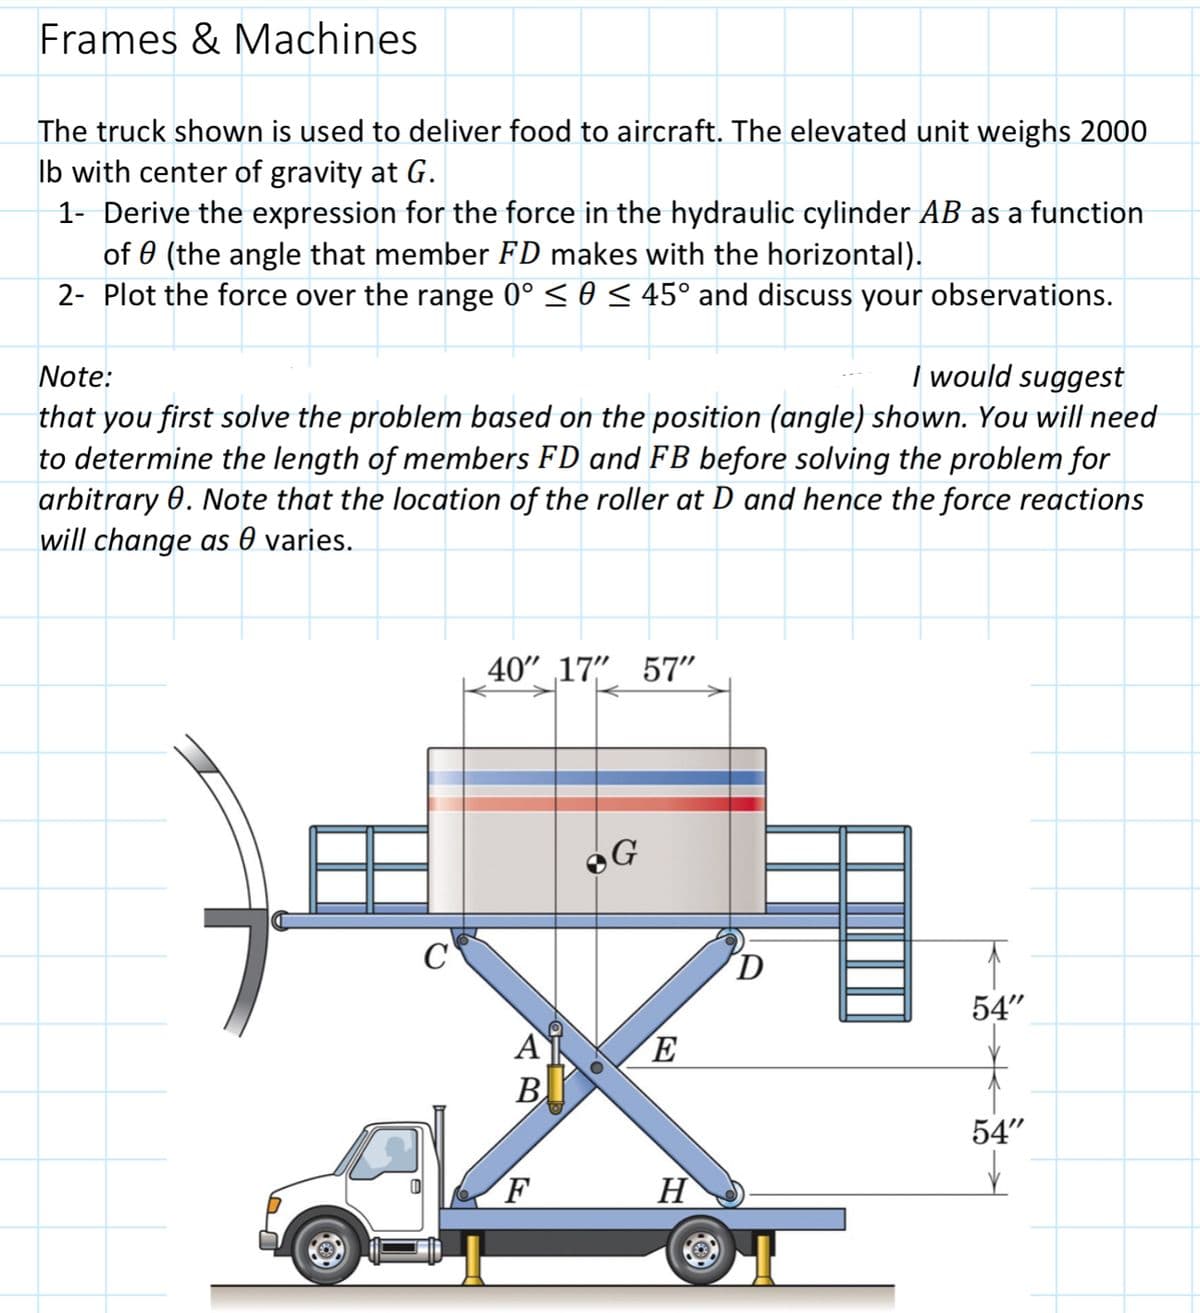 Frames & Machines
The truck shown is used to deliver food to aircraft. The elevated unit weighs 2000
Ib with center of gravity at G.
1- Derive the expression for the force in the hydraulic cylinder AB as a function
of 0 (the angle that member FD makes with the horizontal).
2- Plot the force over the range 0° < 0 < 45° and discuss your observations.
Note:
| would suggest
that you first solve the problem based on the position (angle) shown. You will need
to determine the length of members FD and FB before solving the problem for
arbitrary 0. Note that the location of the roller at D and hence the force reactions
will change as 0 varies.
40" 17" 57"
C
54"
E
54"
H
AB
